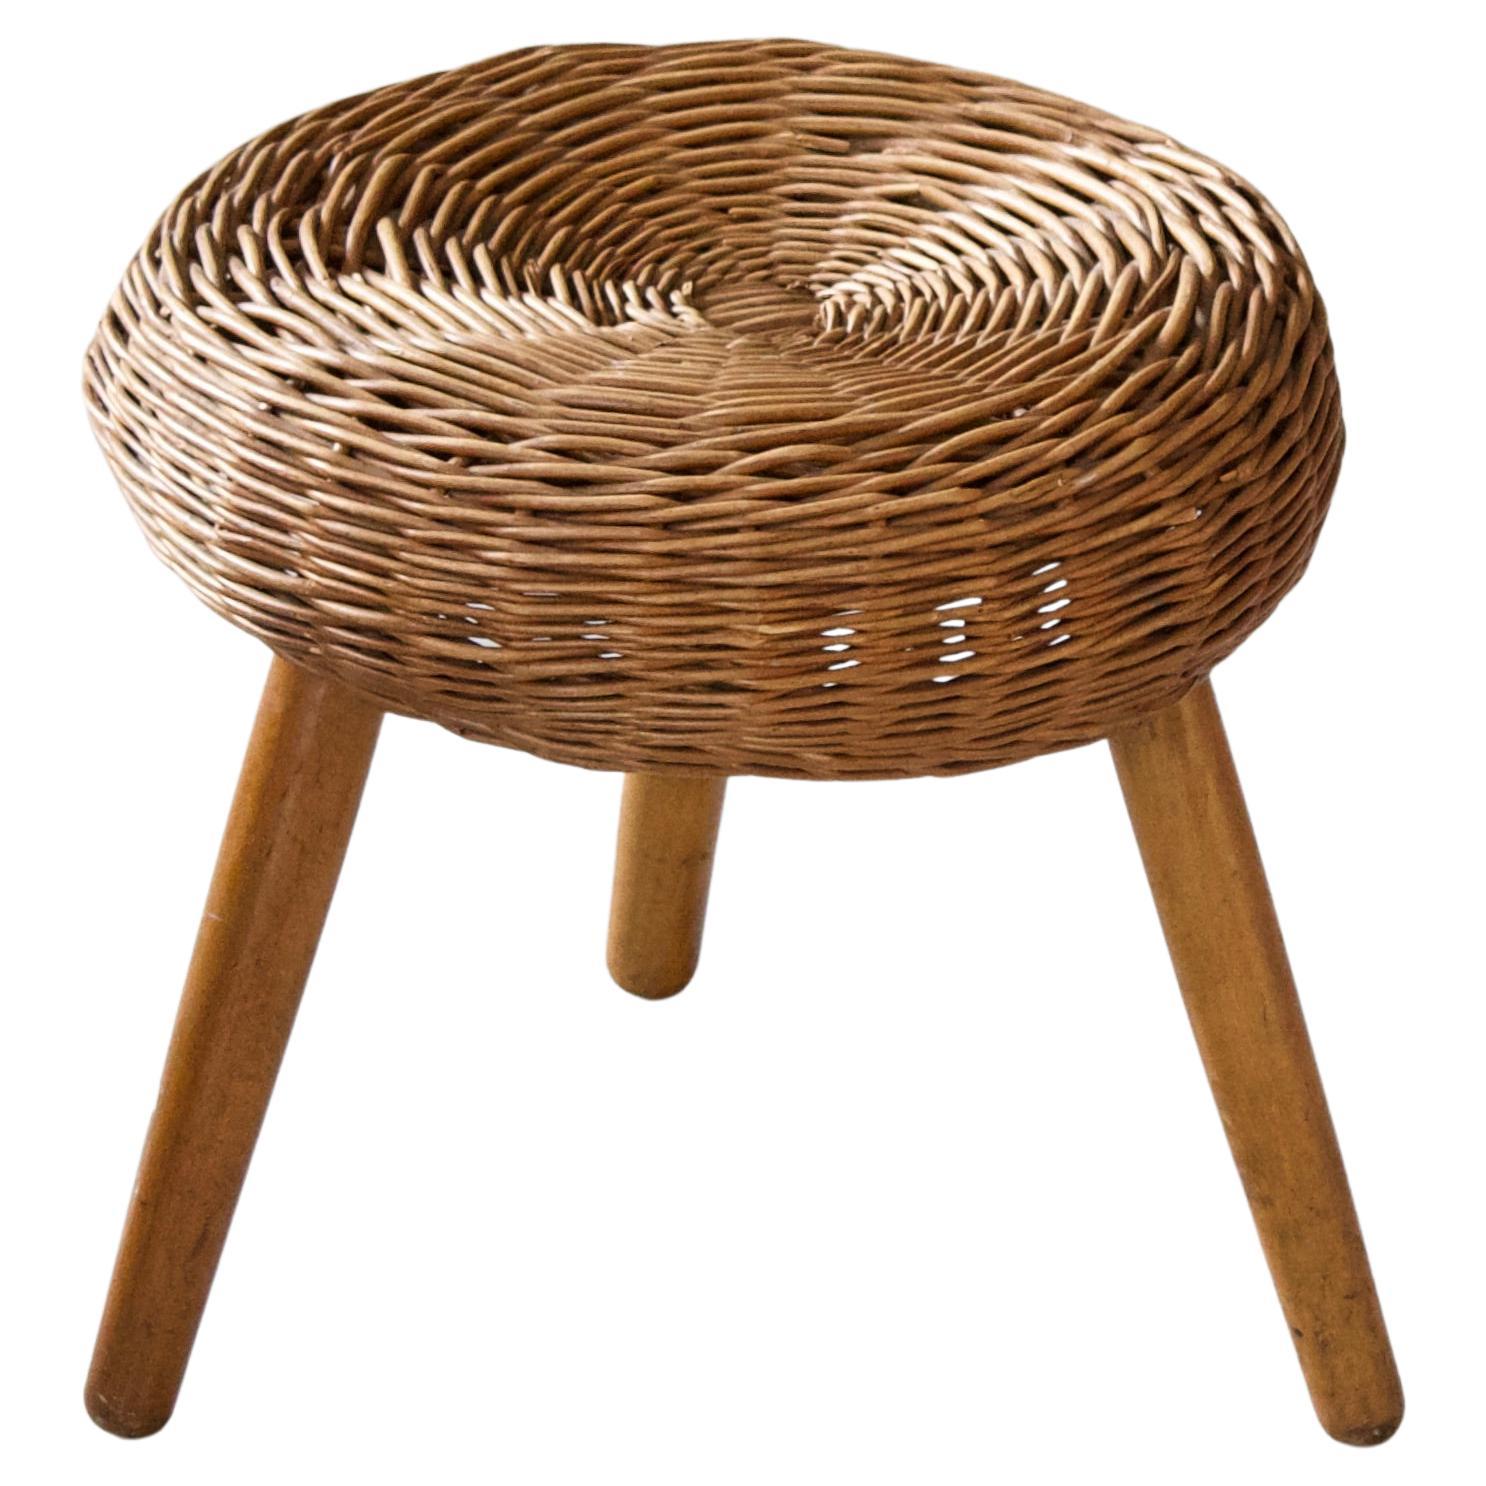 Tony Paul 'Attribution' Stool, Woven Wicker, Wood, United States, 1950s For Sale